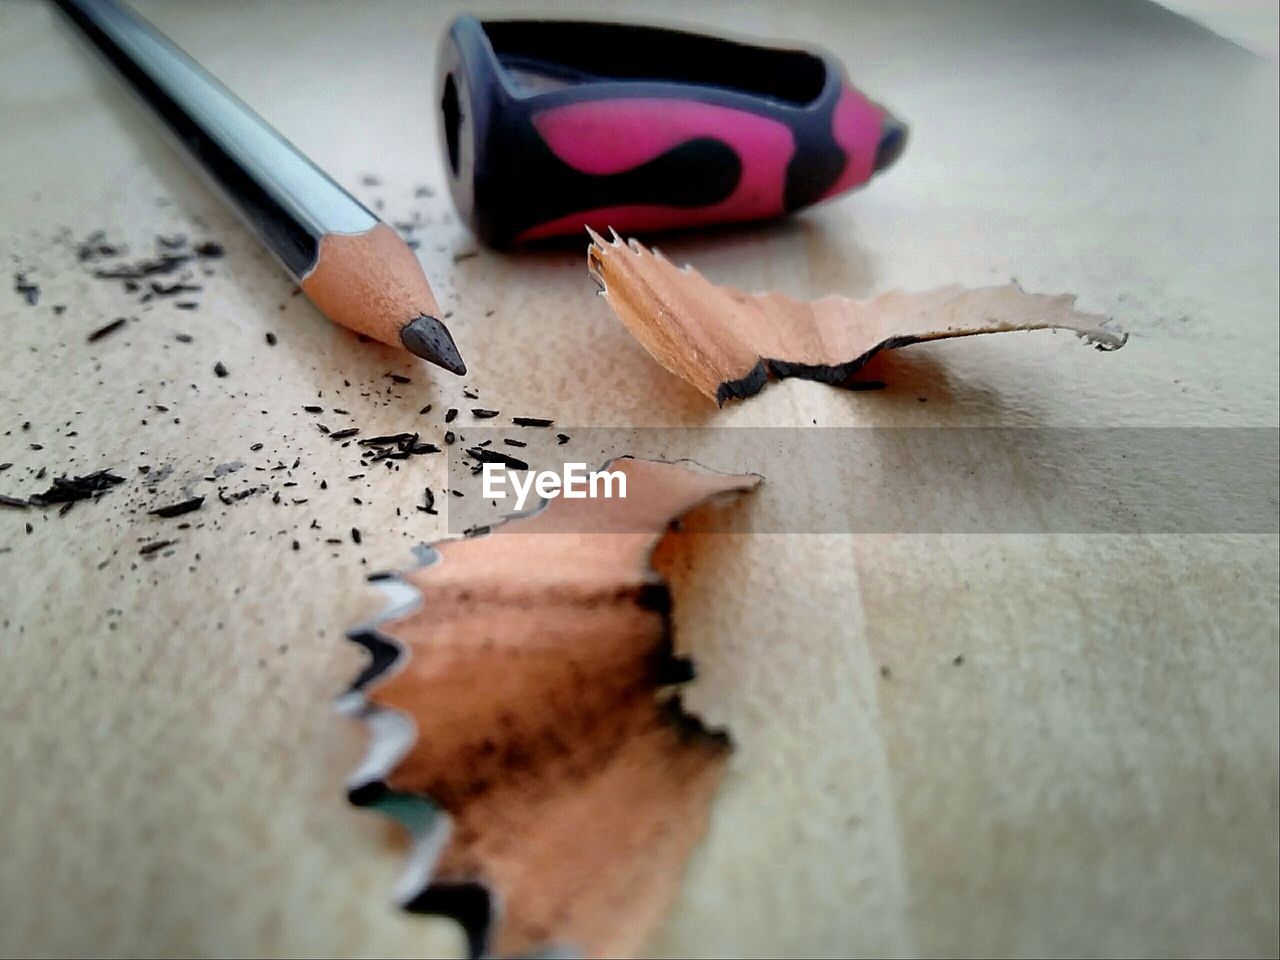 Pencil and sharpener with shavings on table